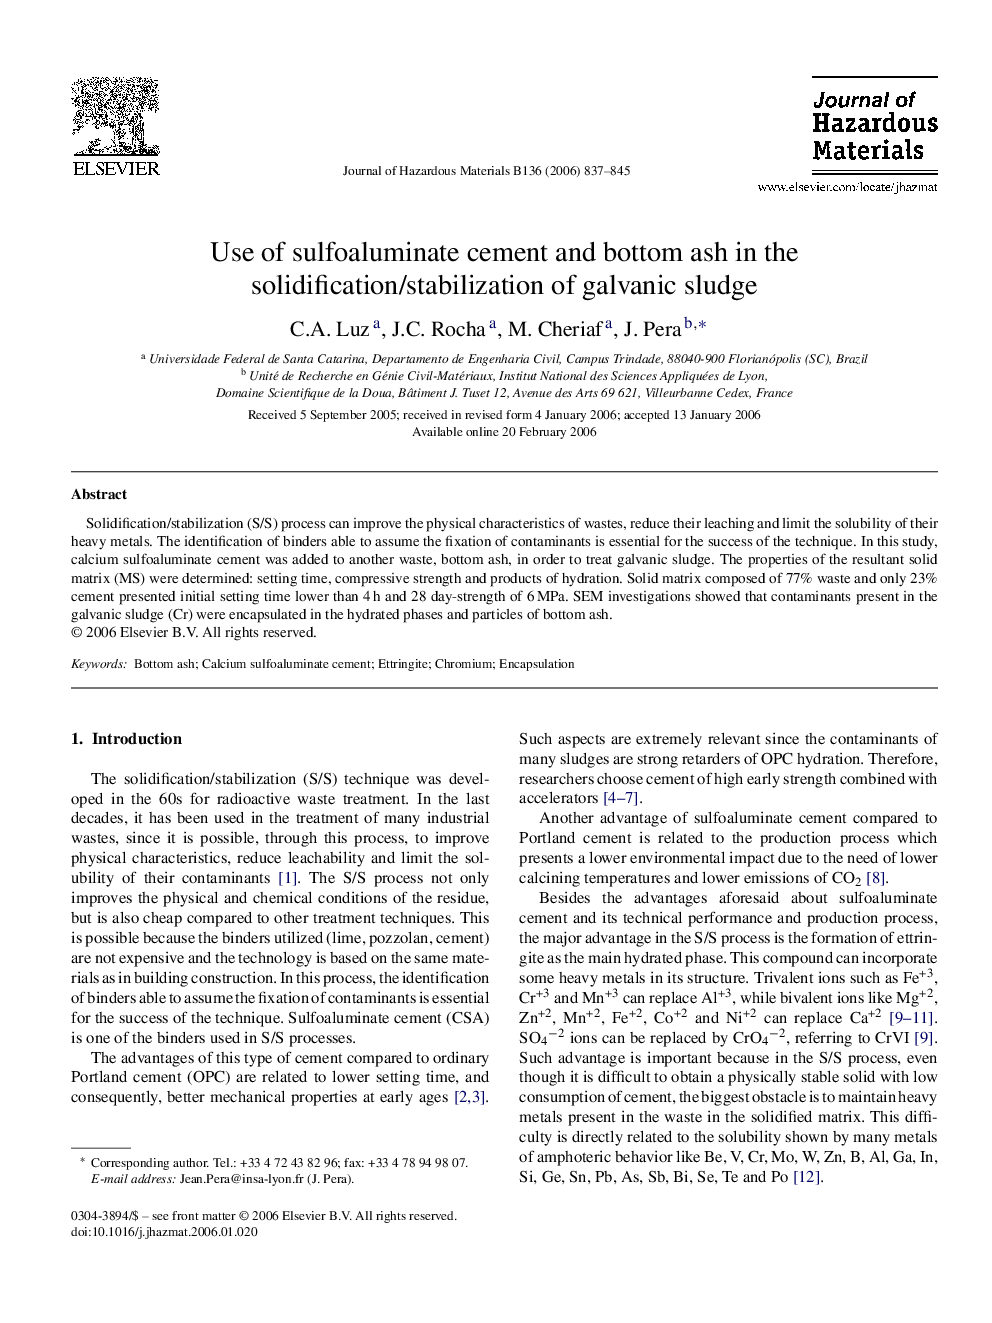 Use of sulfoaluminate cement and bottom ash in the solidification/stabilization of galvanic sludge